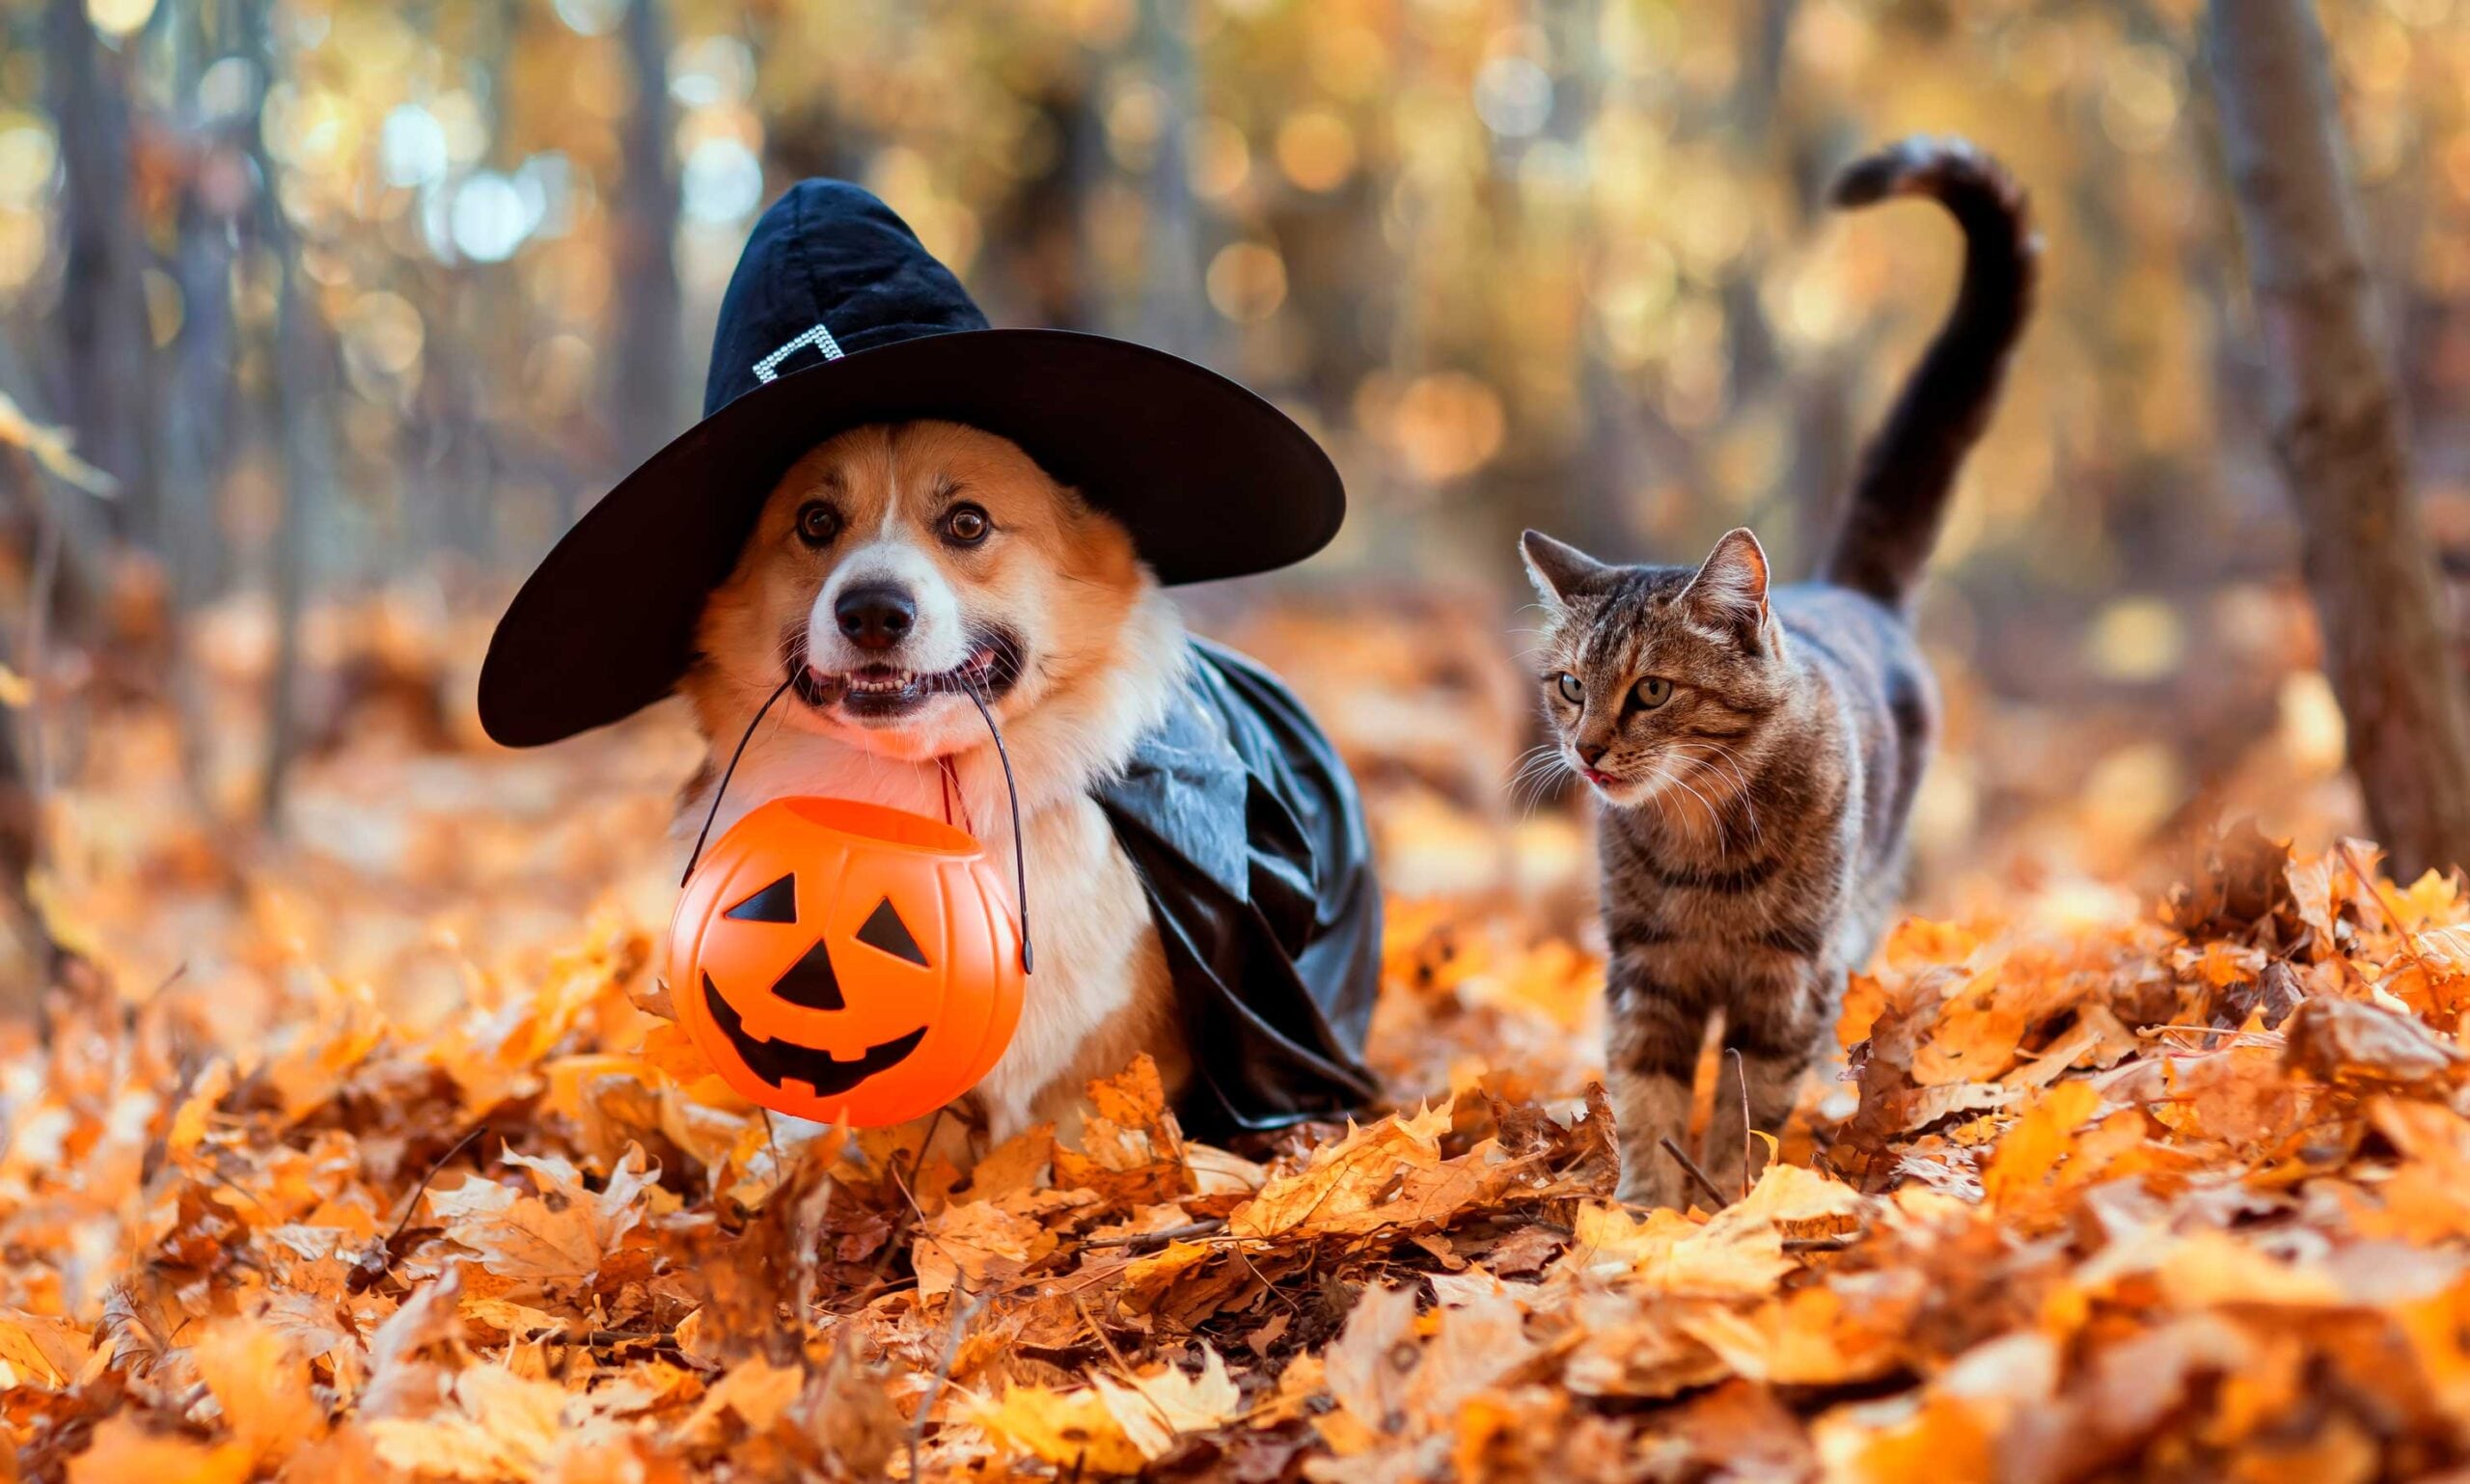 Planning a Spooky, Super-Cute Halloween With Your Pets? We've Got You.